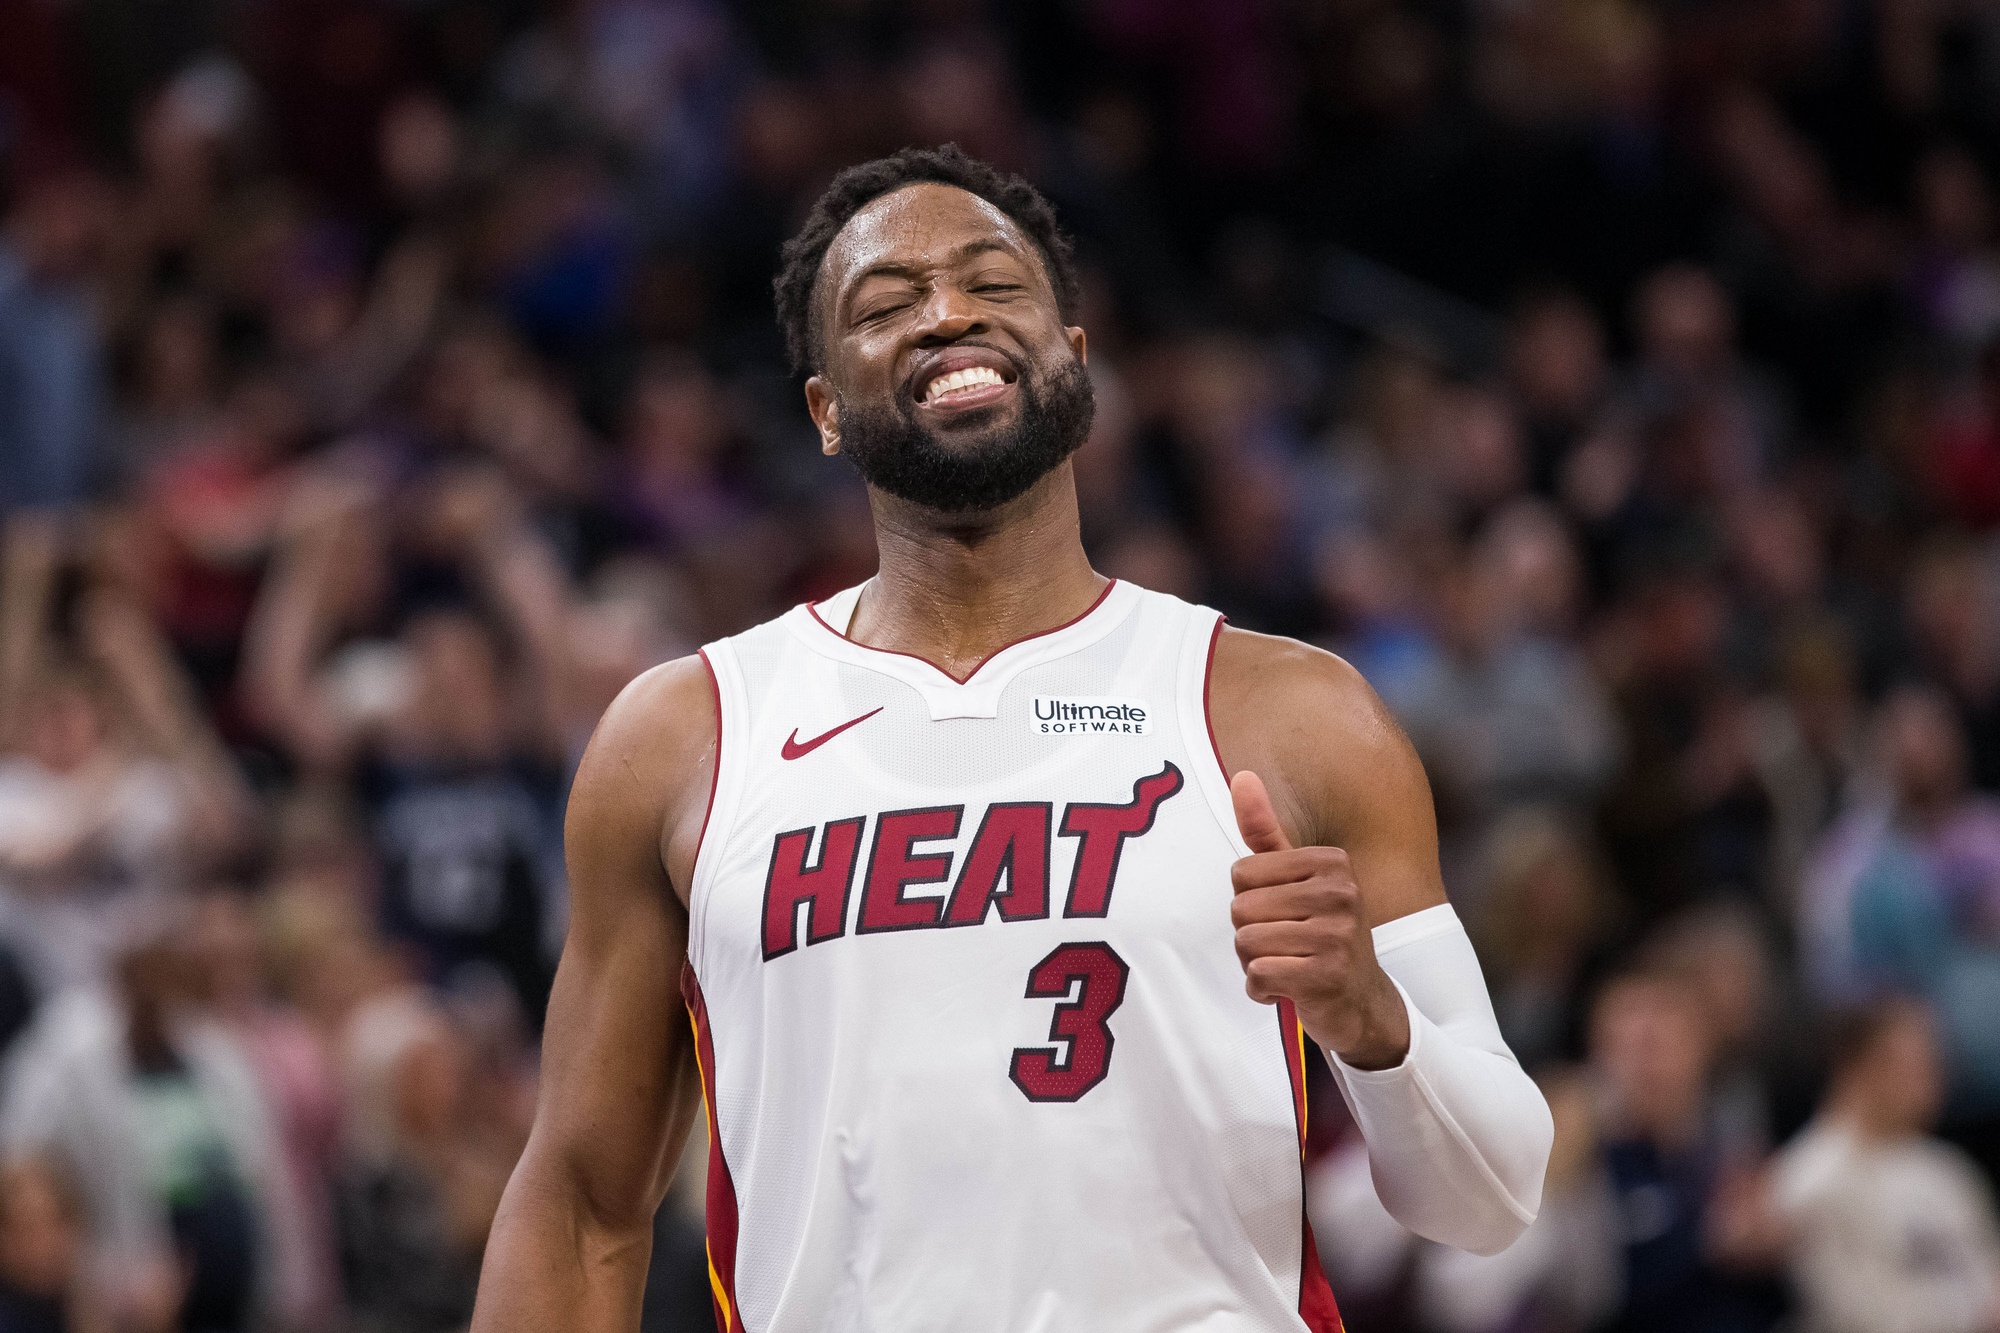 WATCH: Budweiser releases powerful video on eve of Dwyane Wade's final game